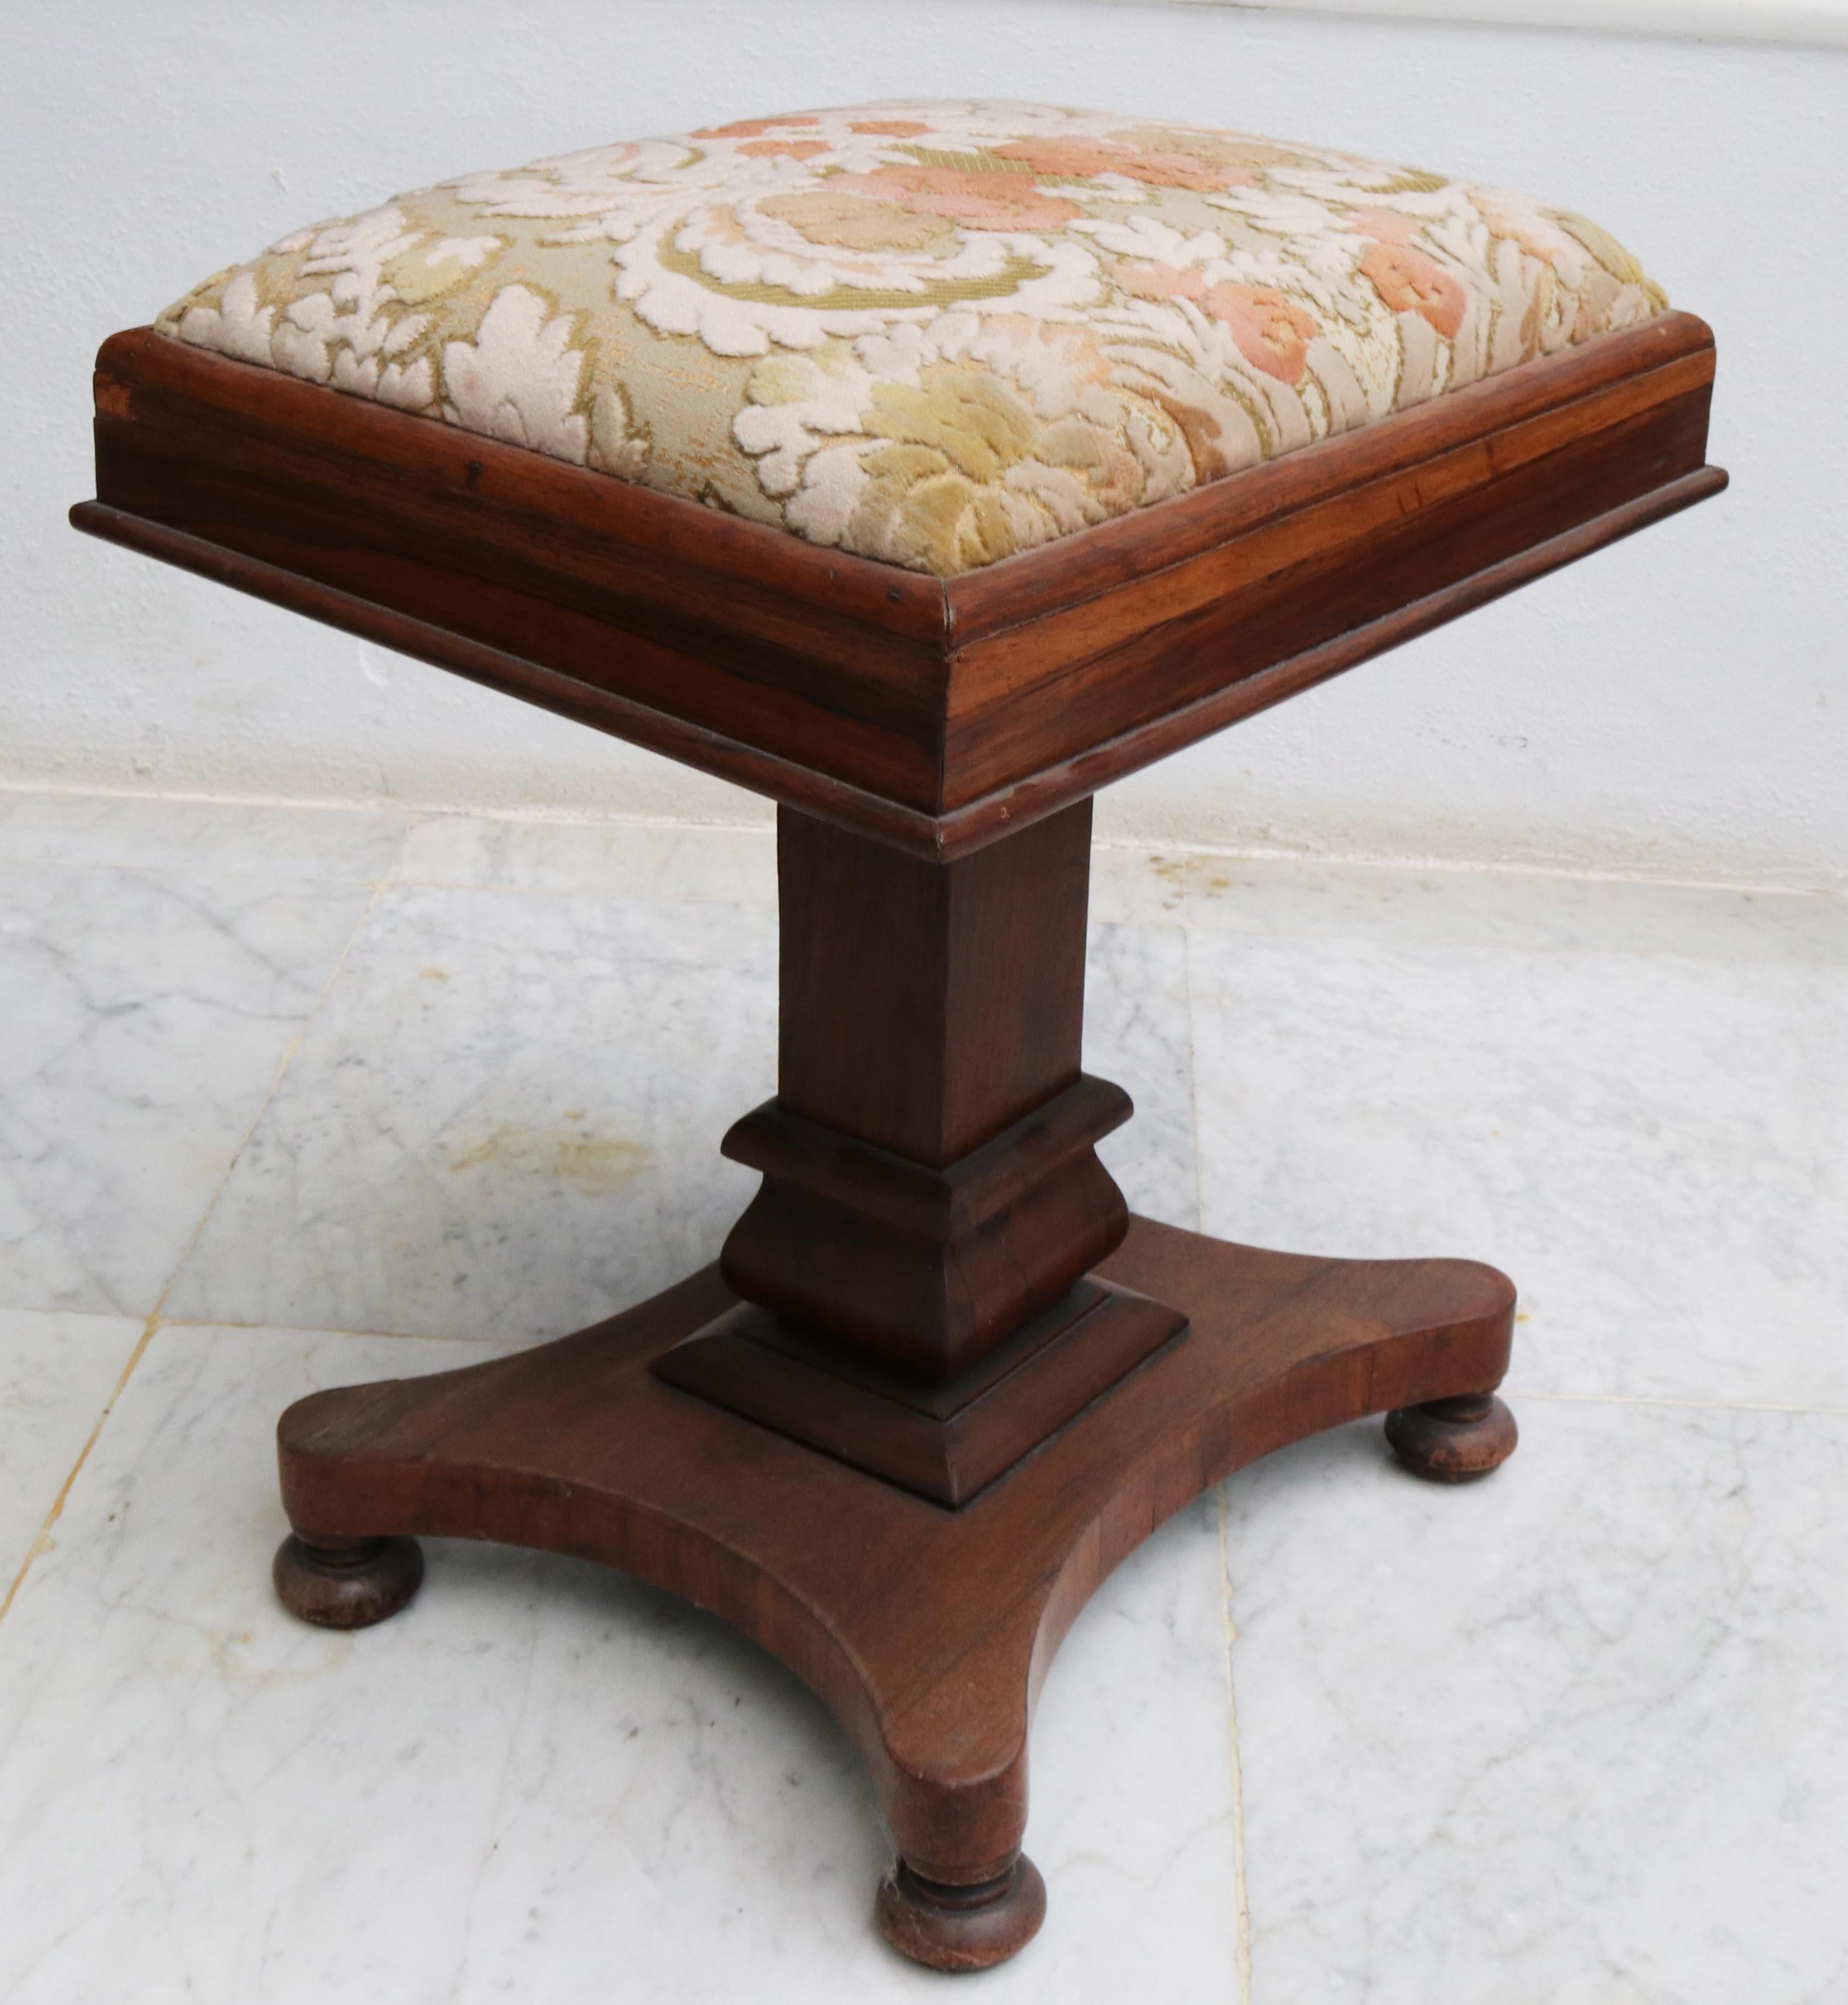 19th Century English mahogany claw foot pedestal side table with upholstered flower pattern velvet top.